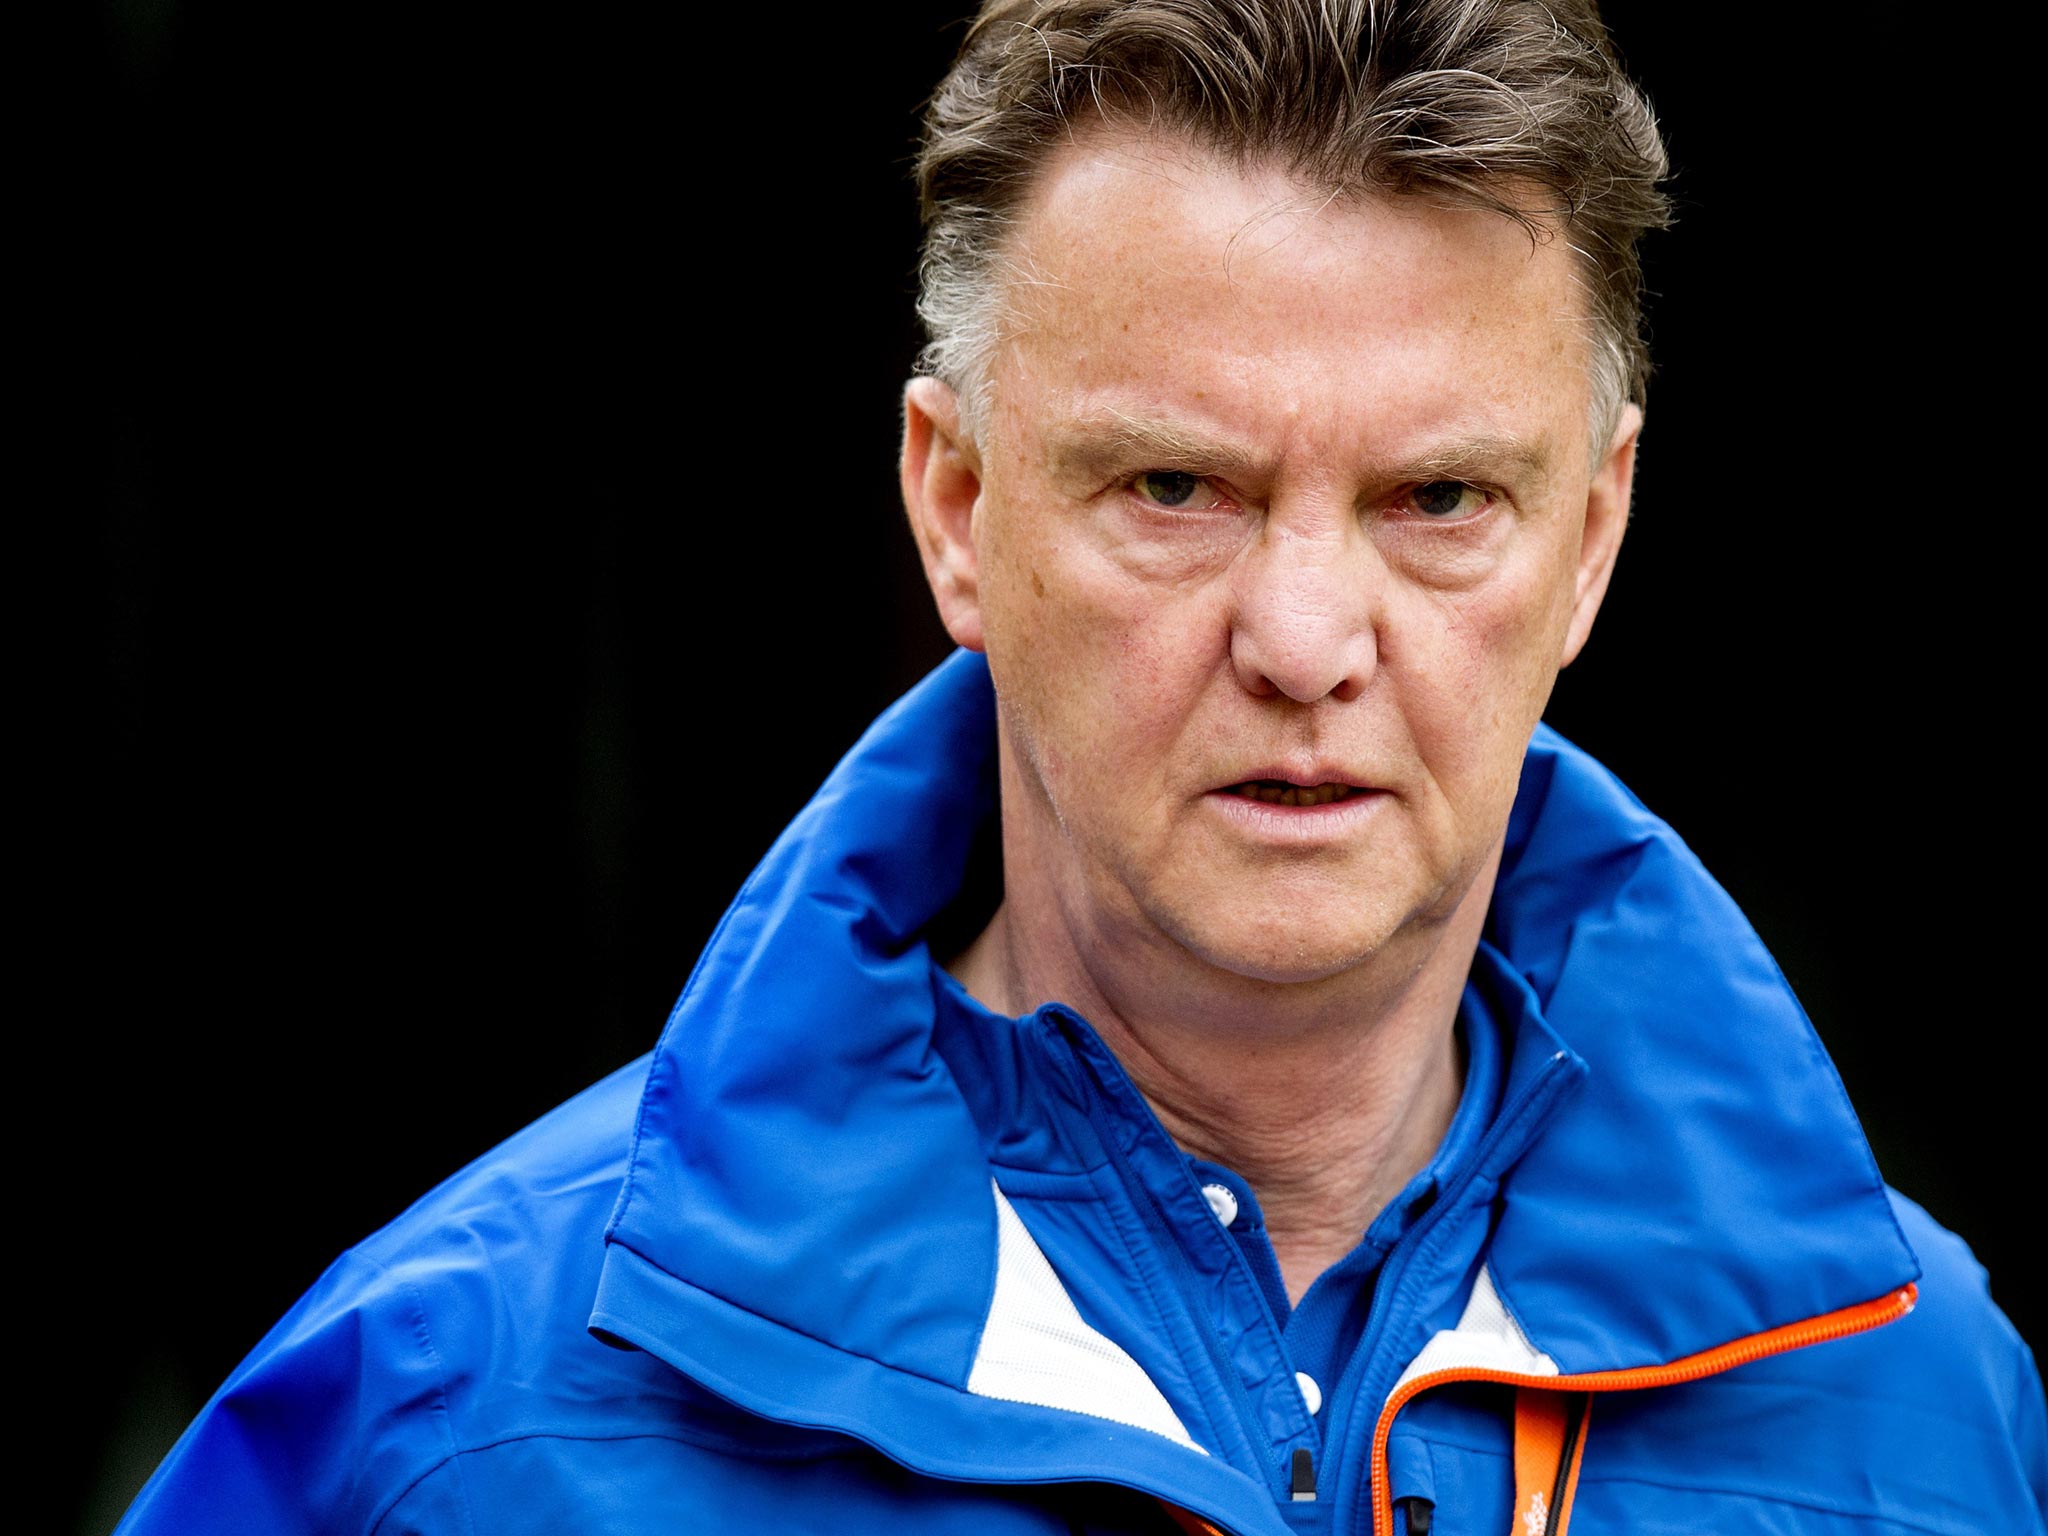 Van Gaal remains as serious as ever though, with his eye focused on his squad as they show their credentials ahead of his squad announcement